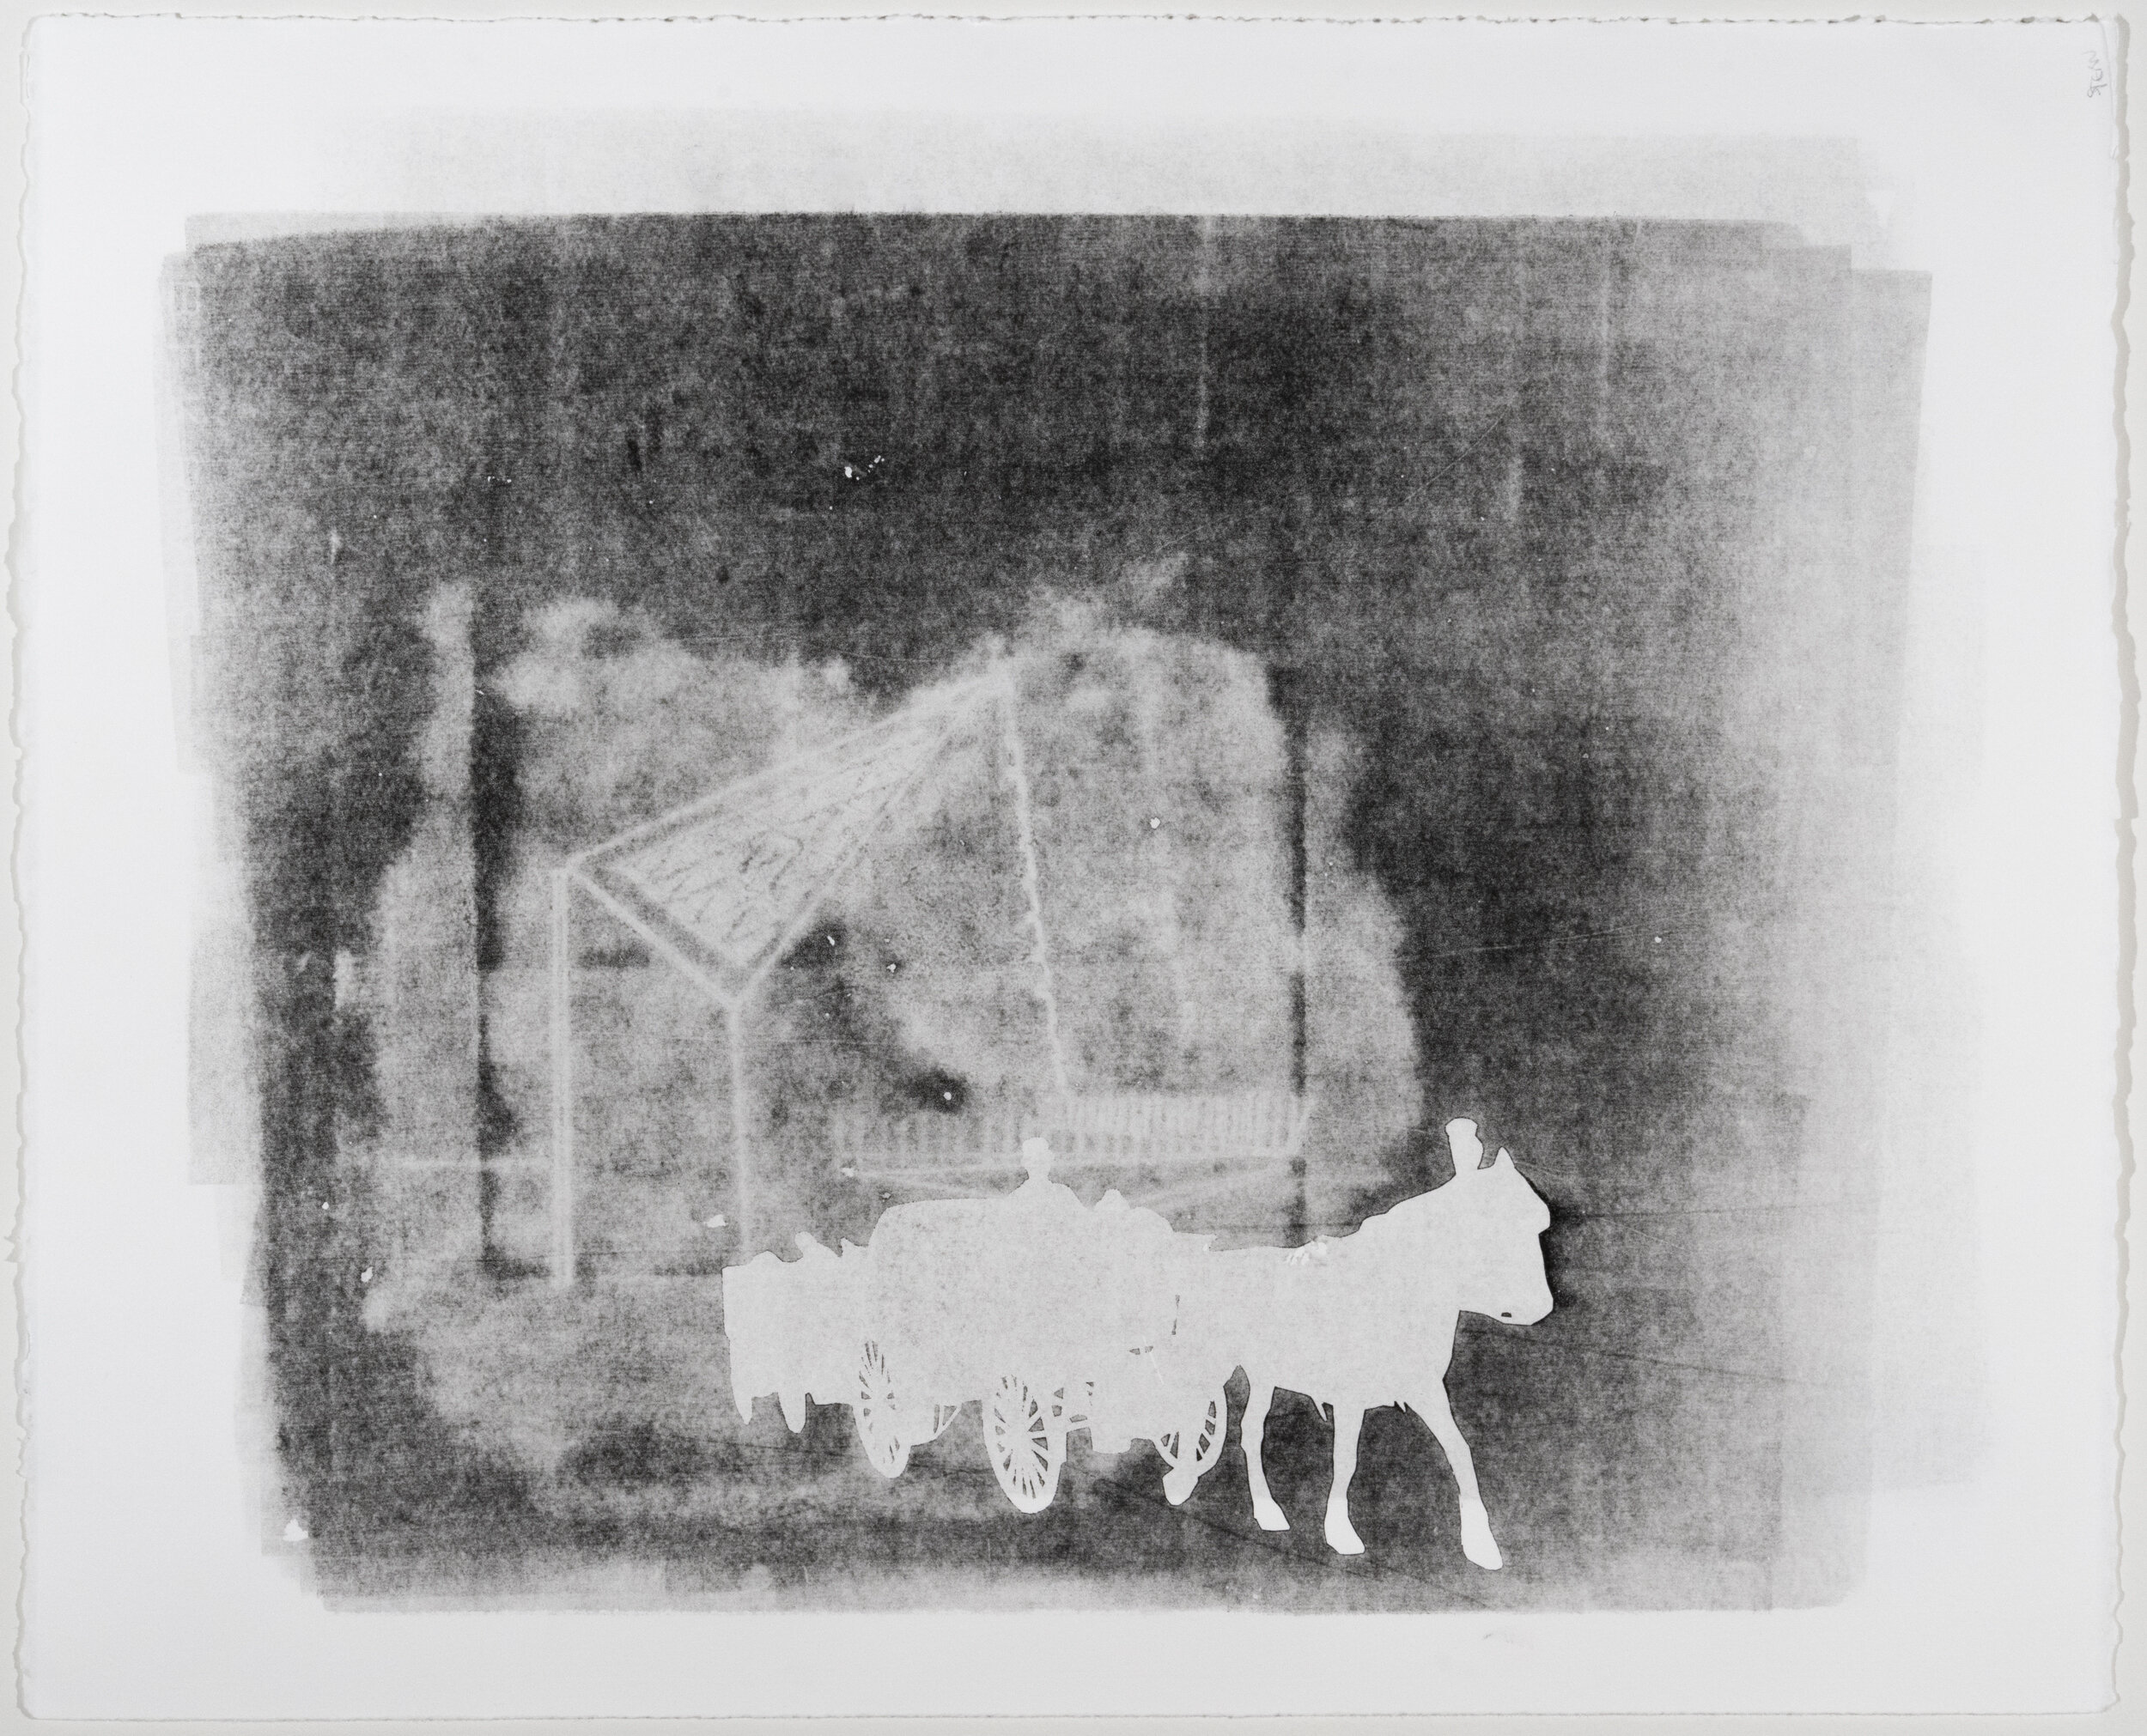 Untitled (Study for Western)